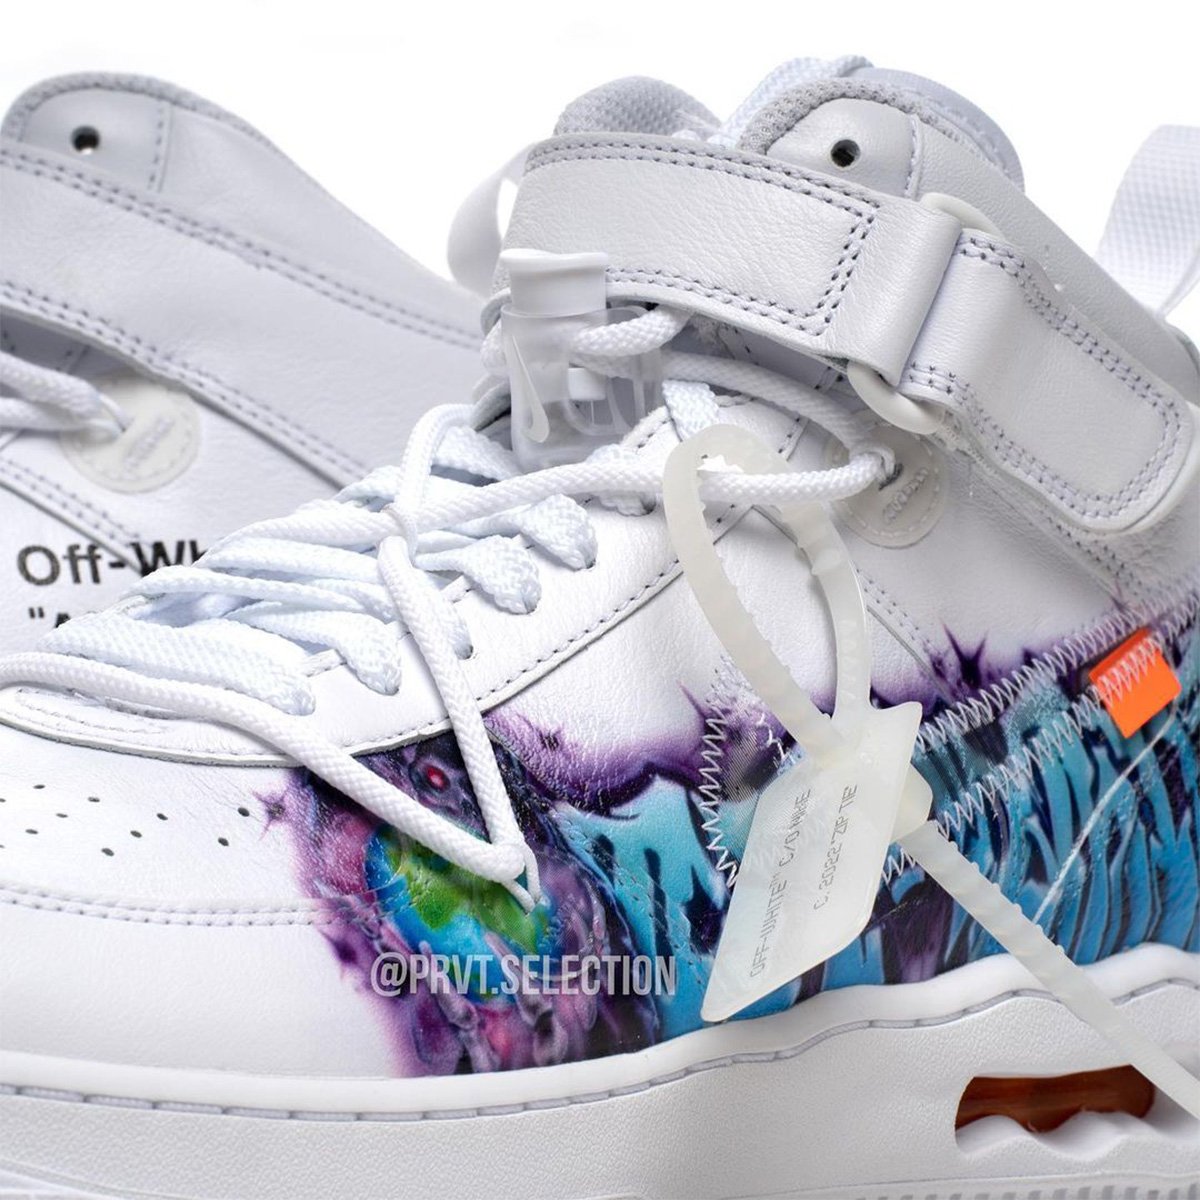 Check Out Virgil Abloh's Off-White x Nike Air Force 1 Mid Graffiti